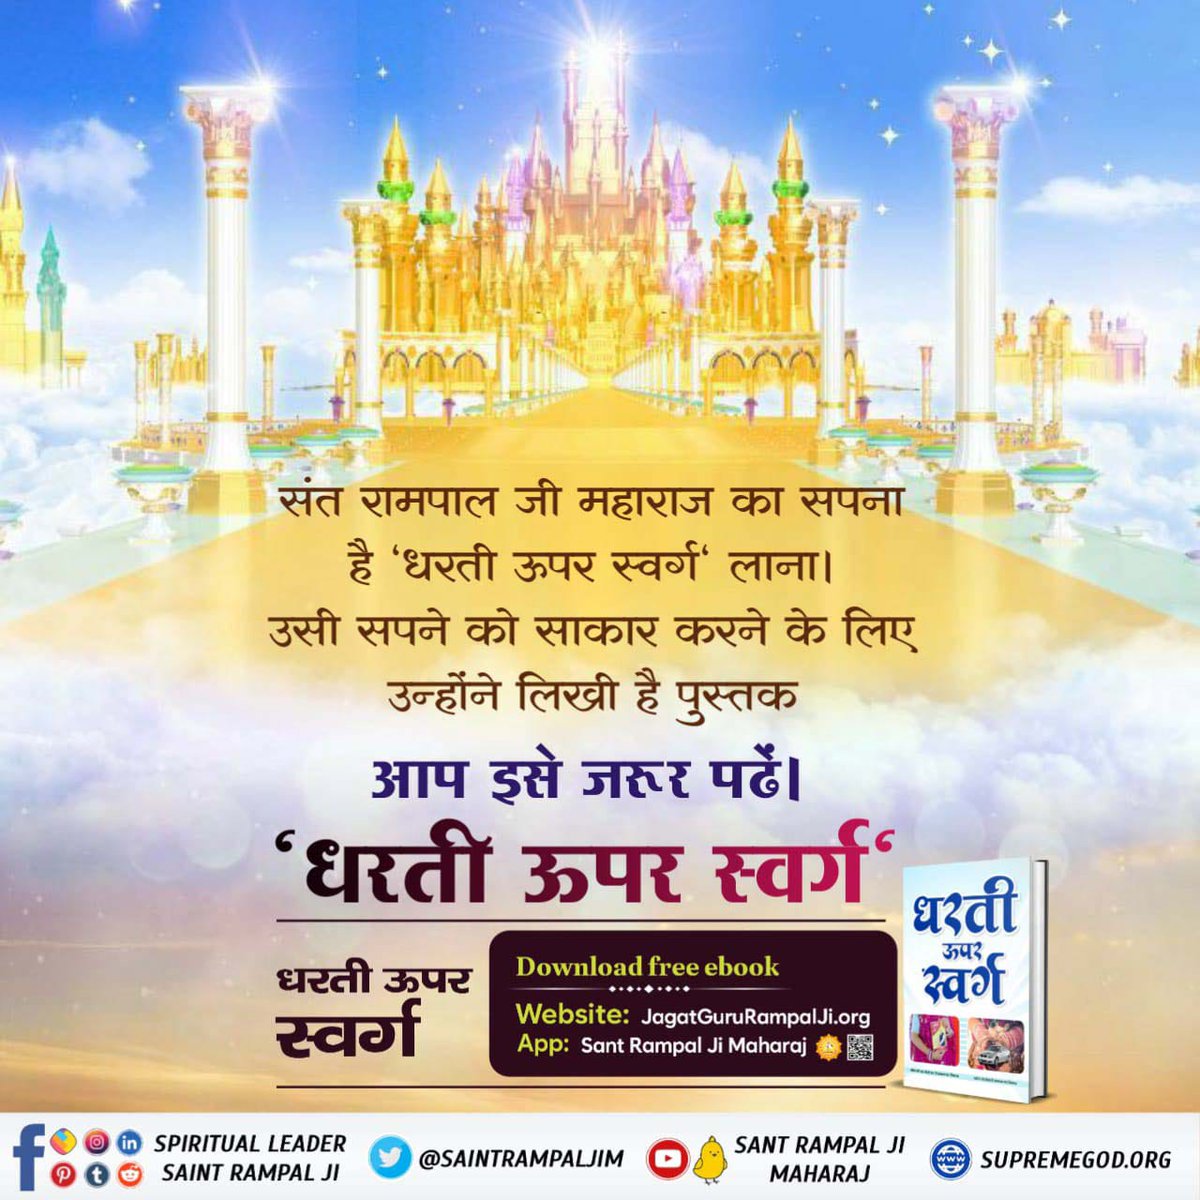 #धरती_को_स्वर्ग_बनाना_है After hearing the thoughts of Sant Rampal Ji Maharaj, no one can ever consider either giving or taking dowry, the logic is so hard-hitting.
Sant Rampal Ji Maharaj